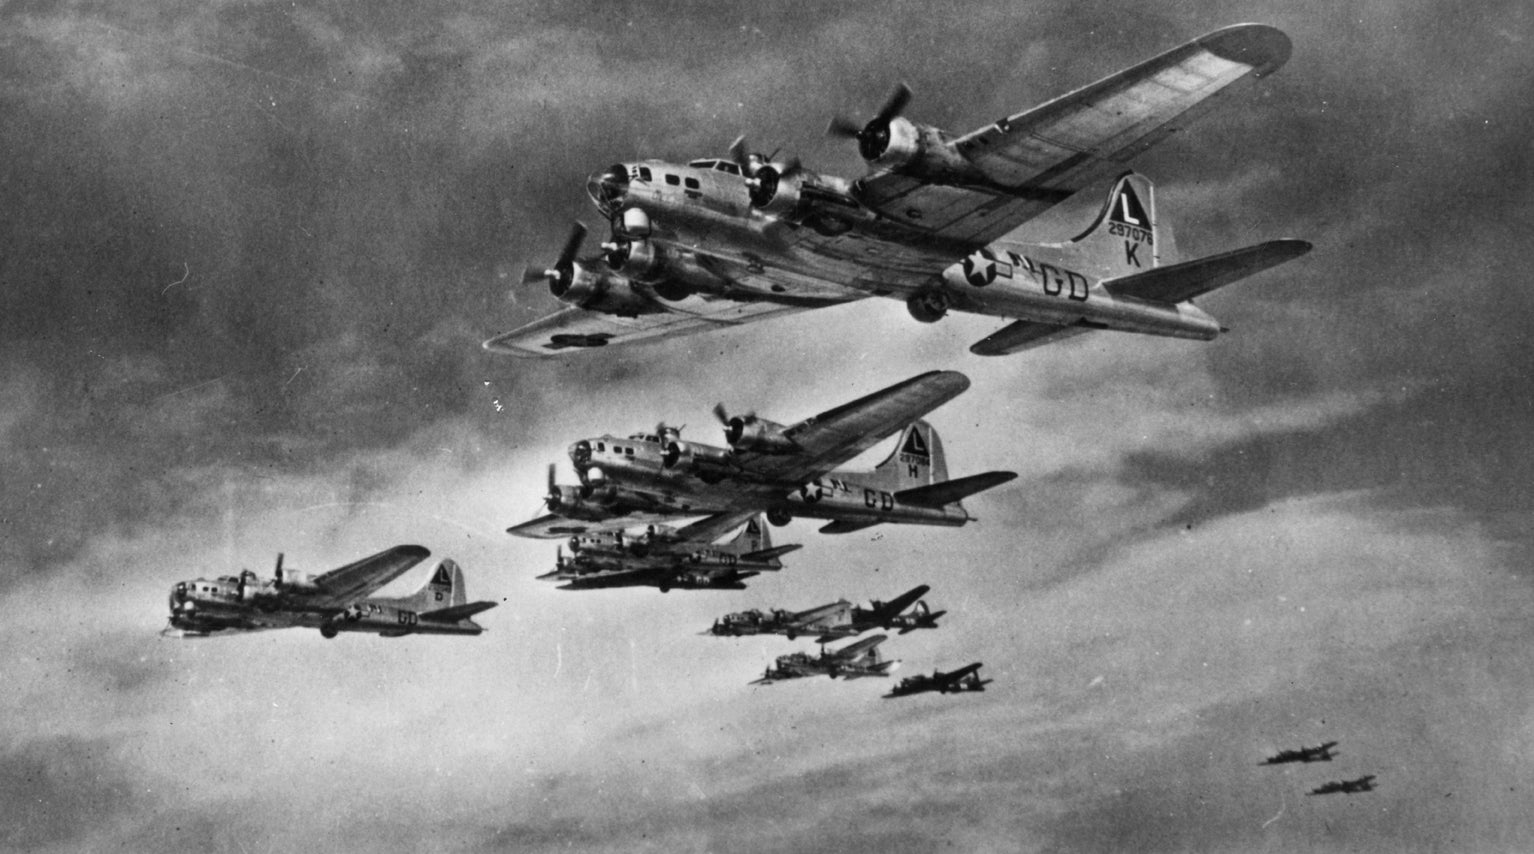 B-17 Flying Fortresses of the 381st Bomb Group fly in formation.